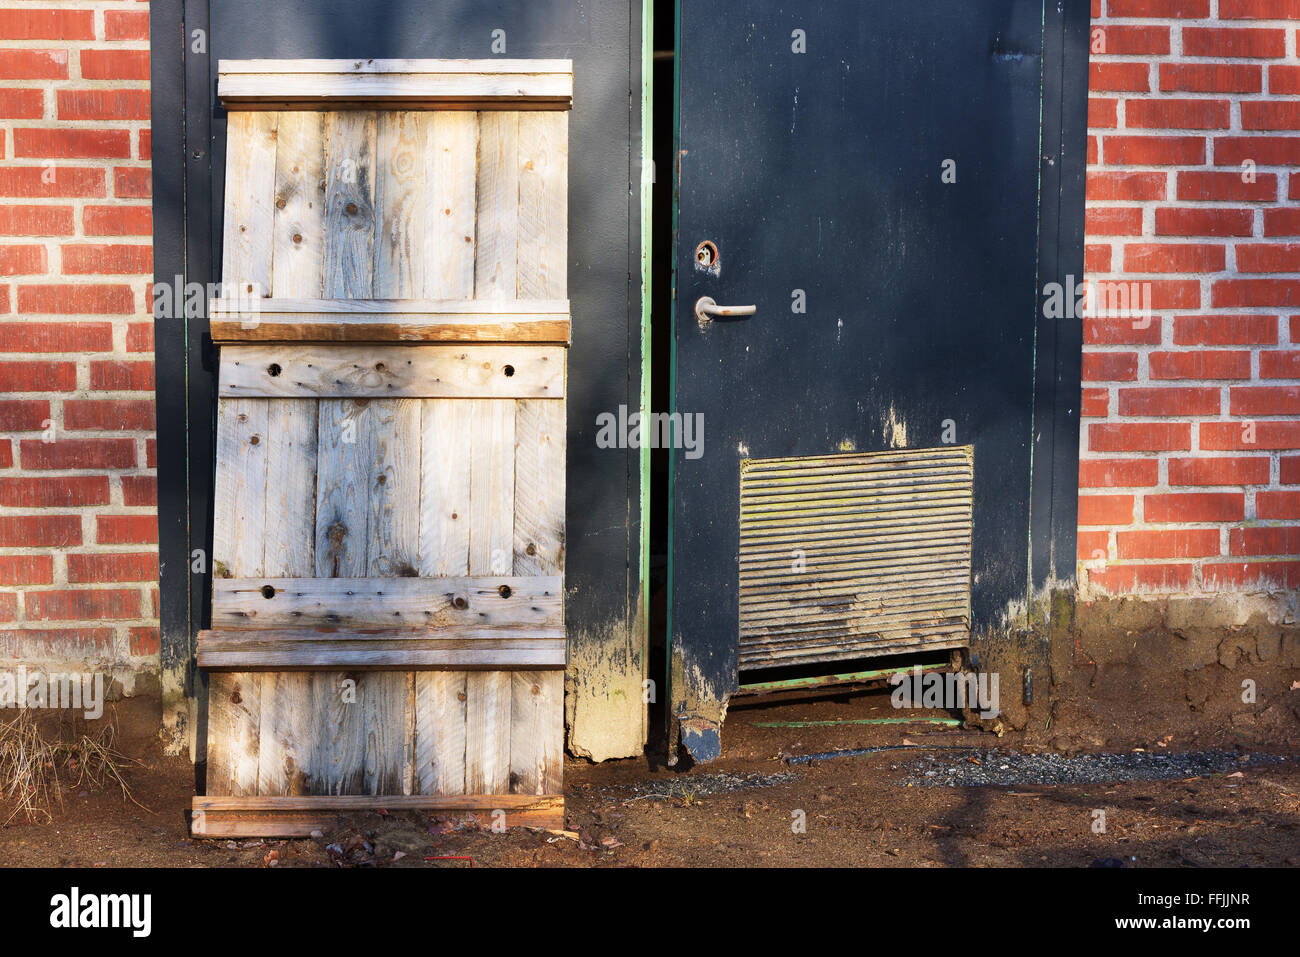 A wooden pallet lean against a black steel door of an abandoned industrial building. Stock Photo